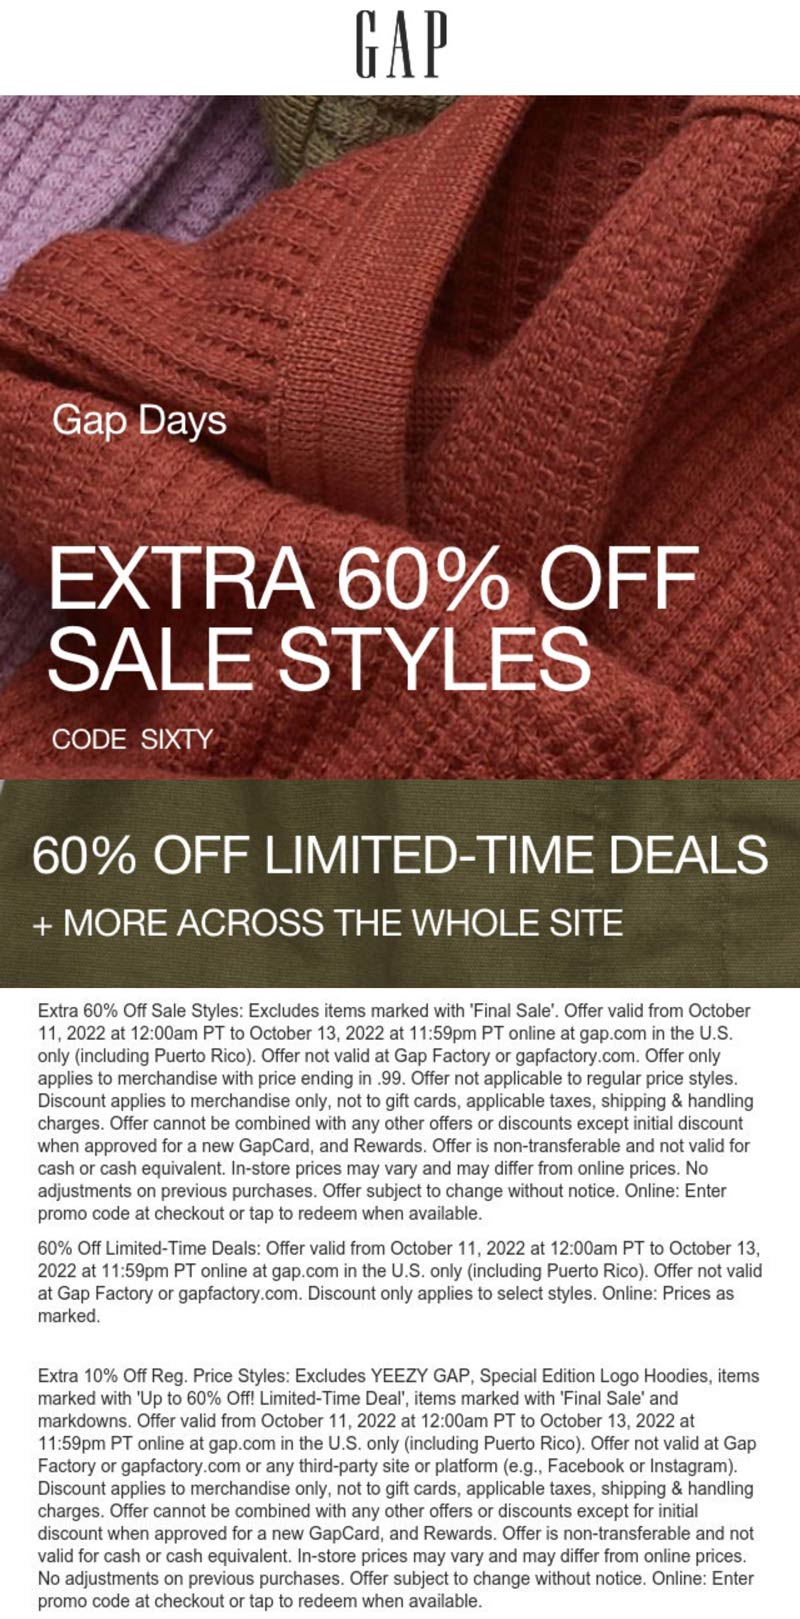 Gap stores Coupon  Exra 60% off sale styles at Gap via promo code SIXTY #gap 